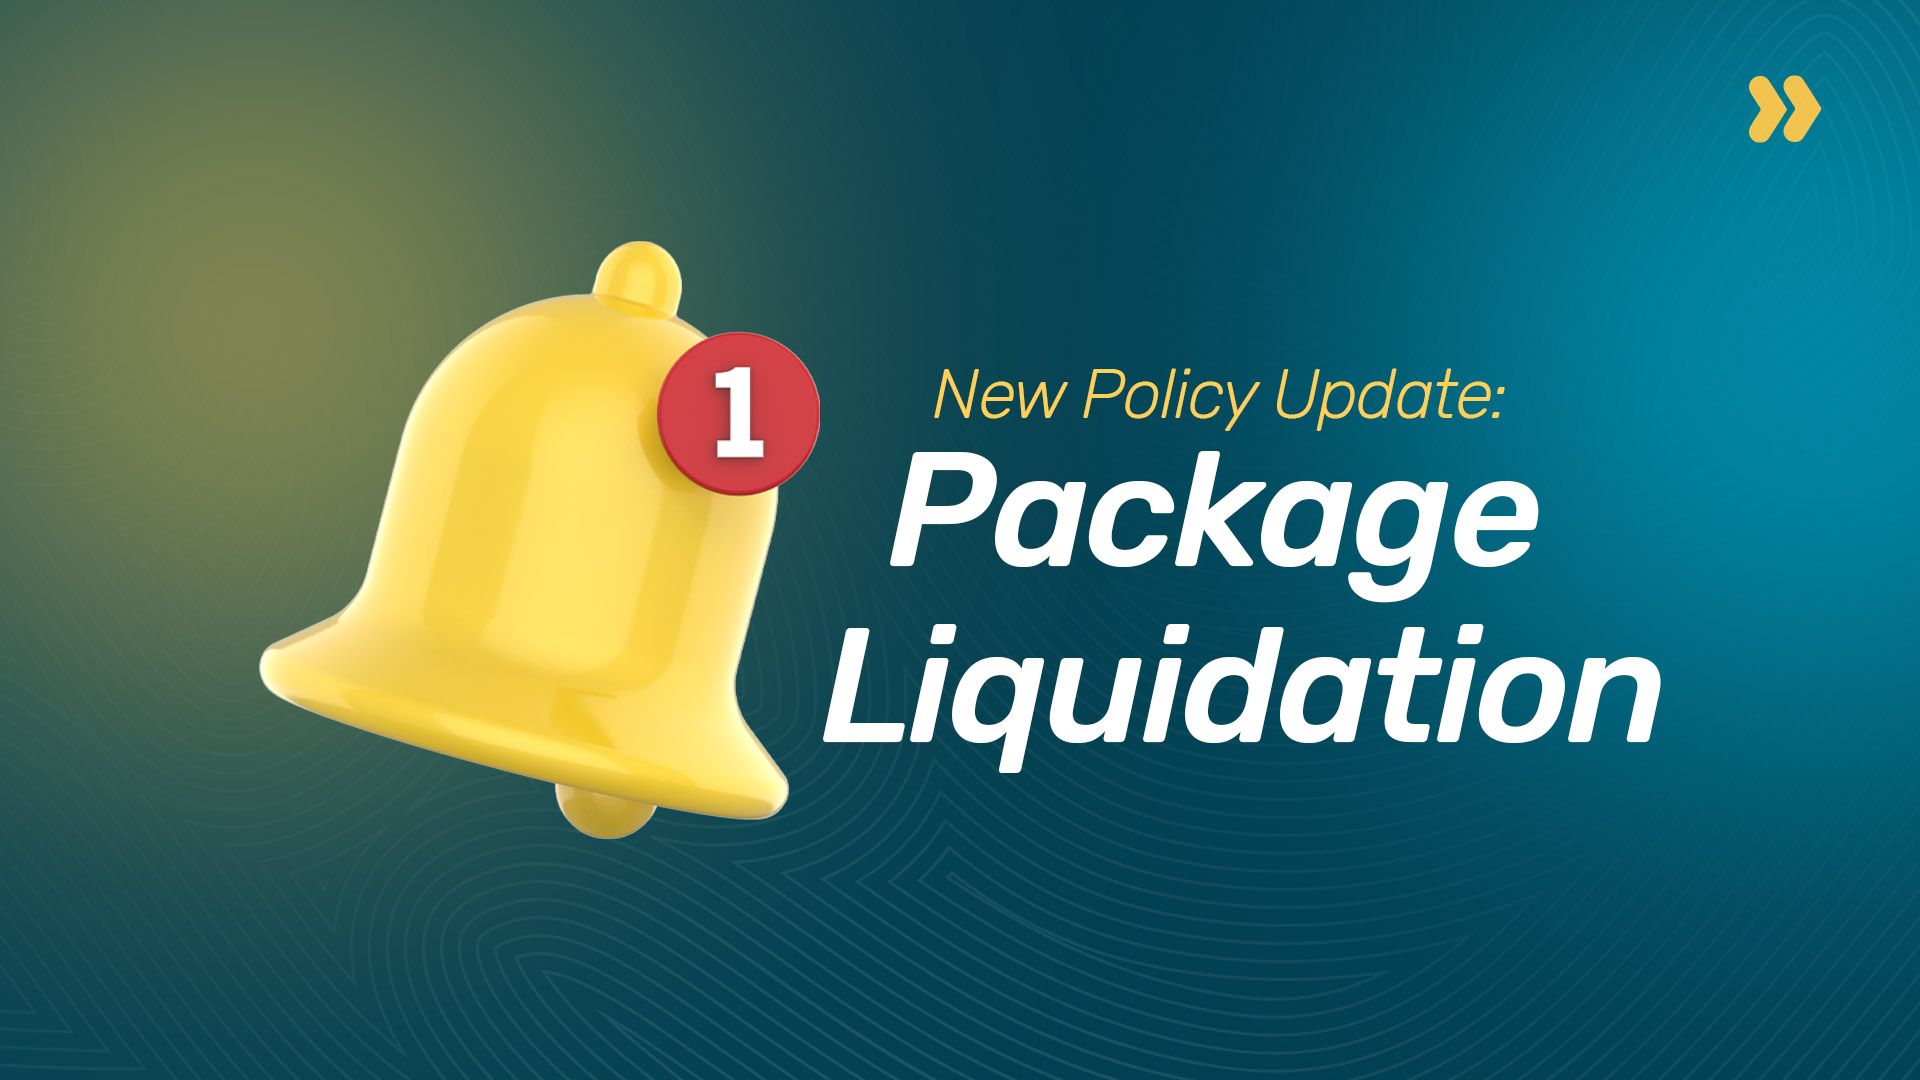 New Policy Update: Package Liquidation